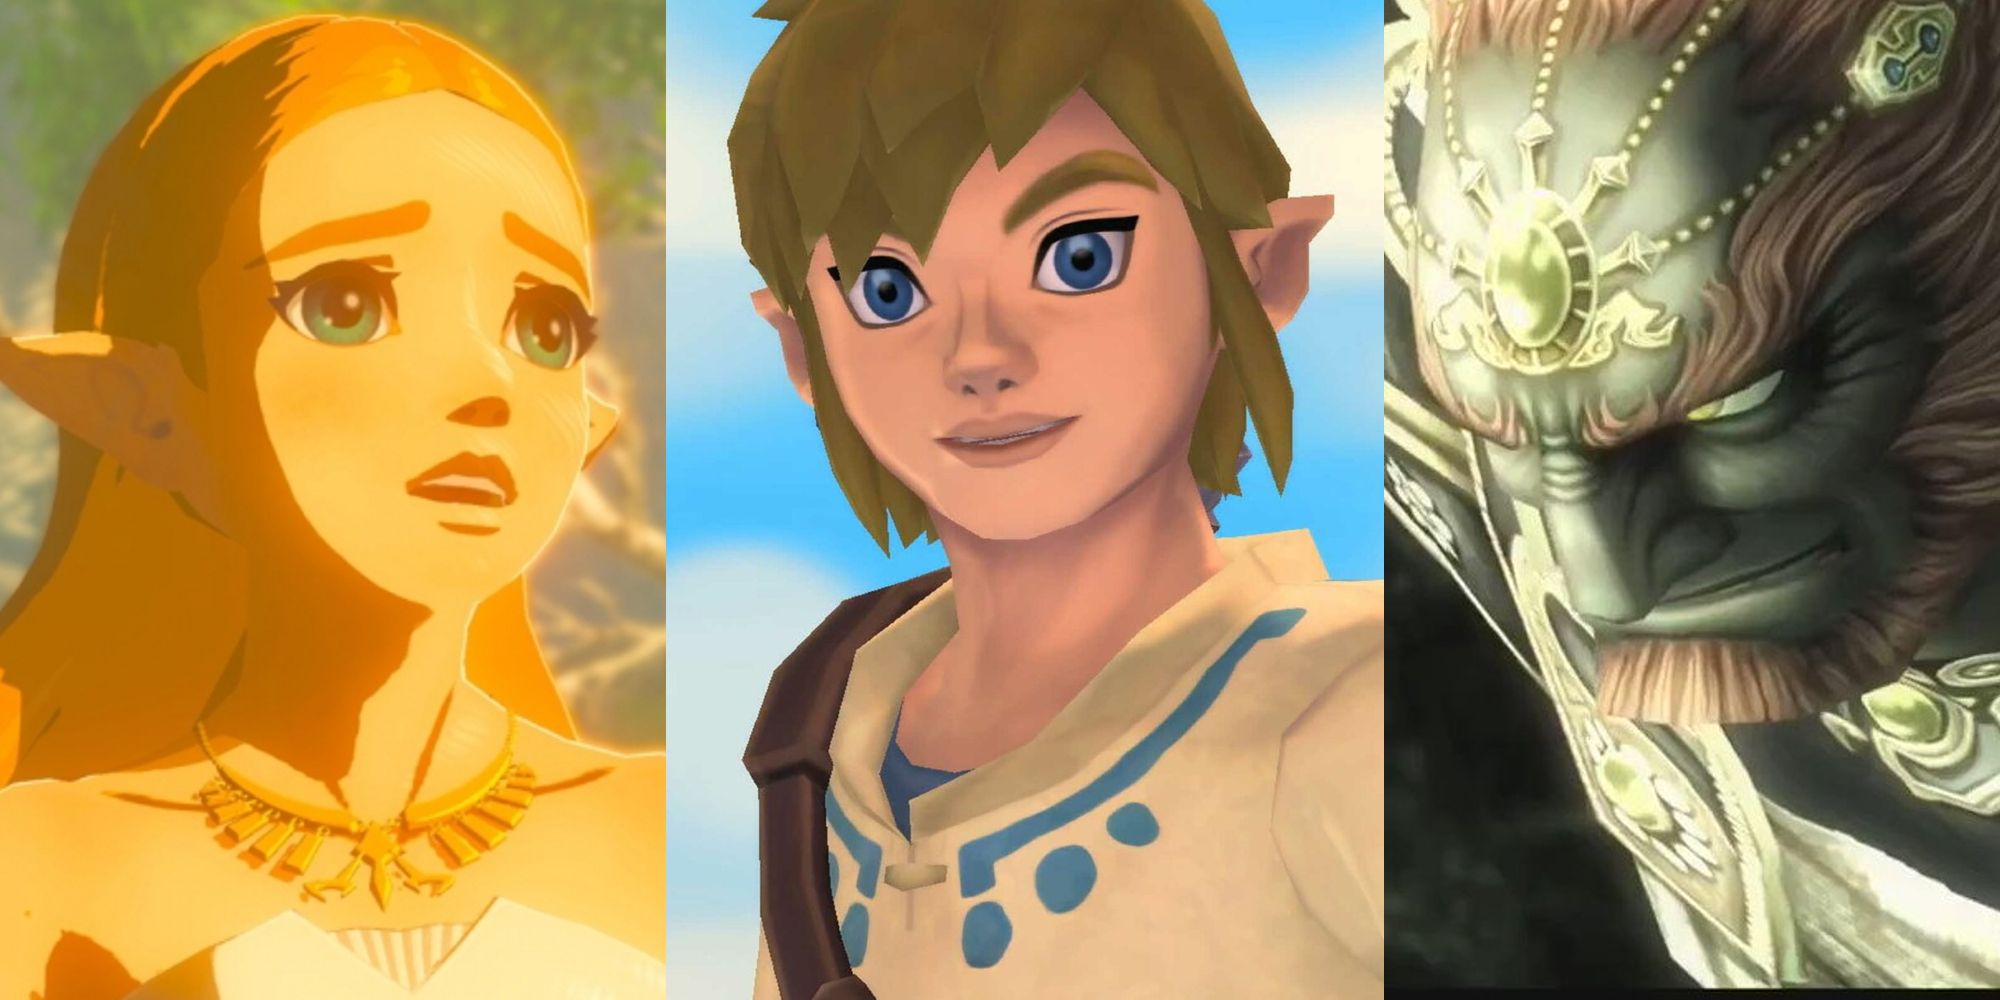 A concerned Zelda in BOTW; Link in casual clothes in Skyward Sword; Ganondorf restrained in Twilight Princess